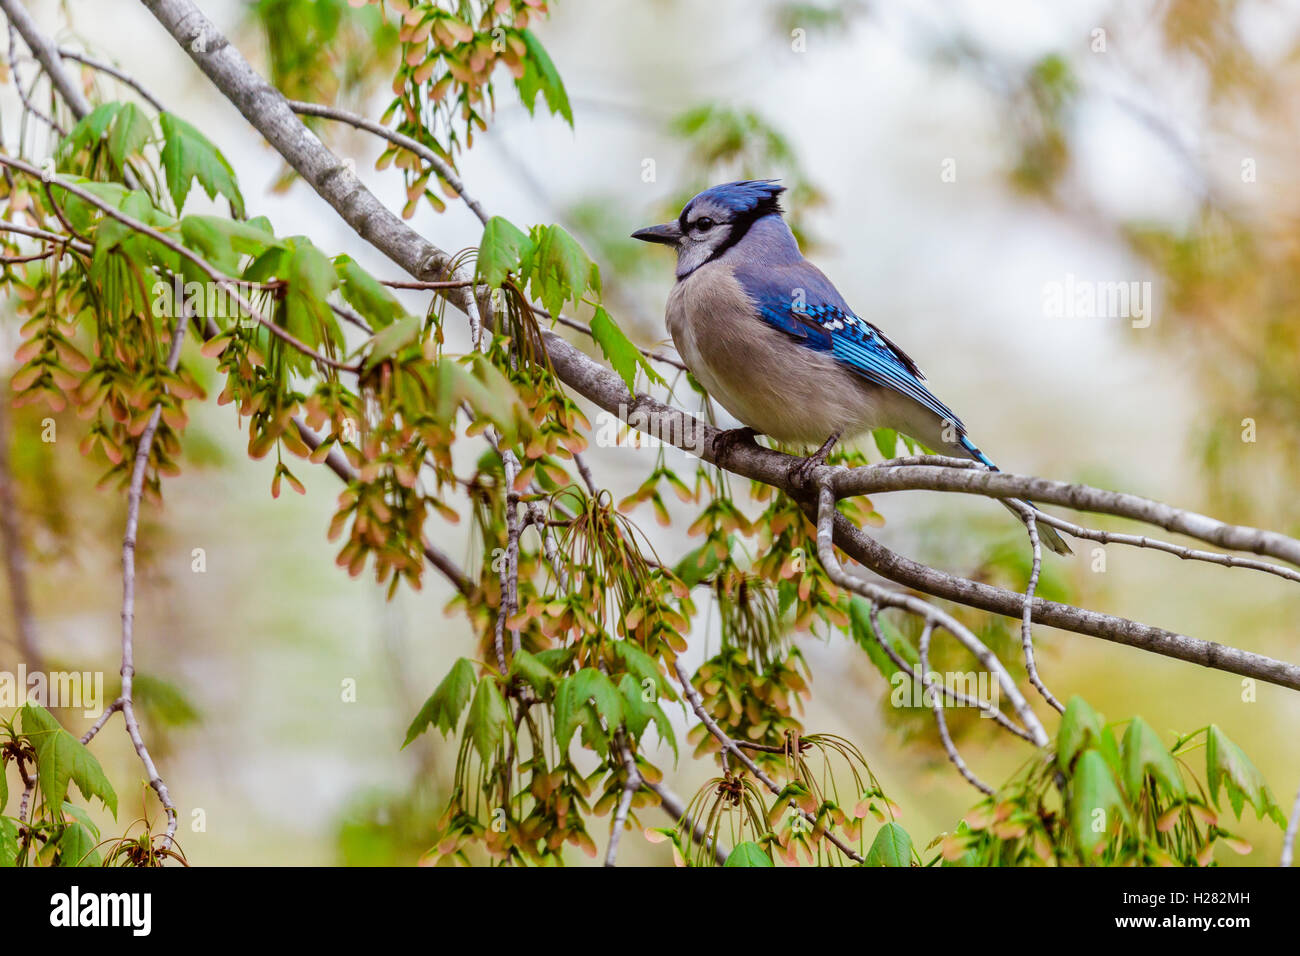 Blue Jay perched on a maple tree branch with helicopter seeds. Stock Photo